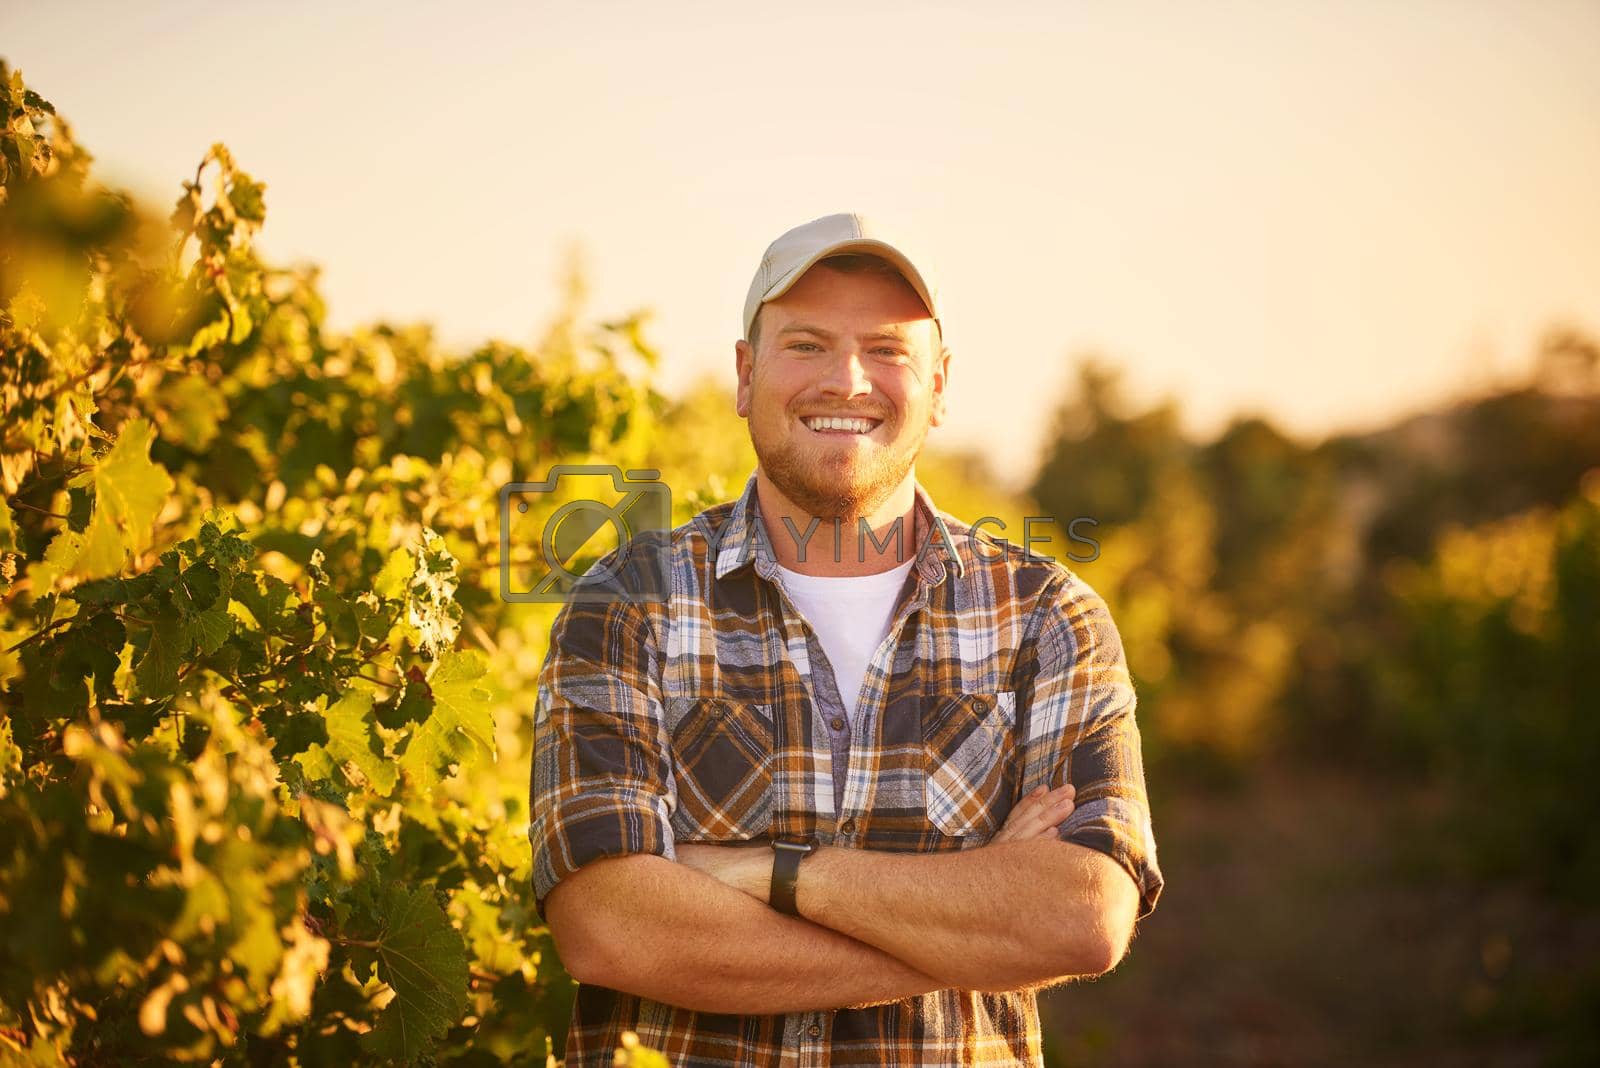 Royalty free image of Farming is in my blood. Portrait of a happy farmer posing with his arms crossed in a vineyard. by YuriArcurs